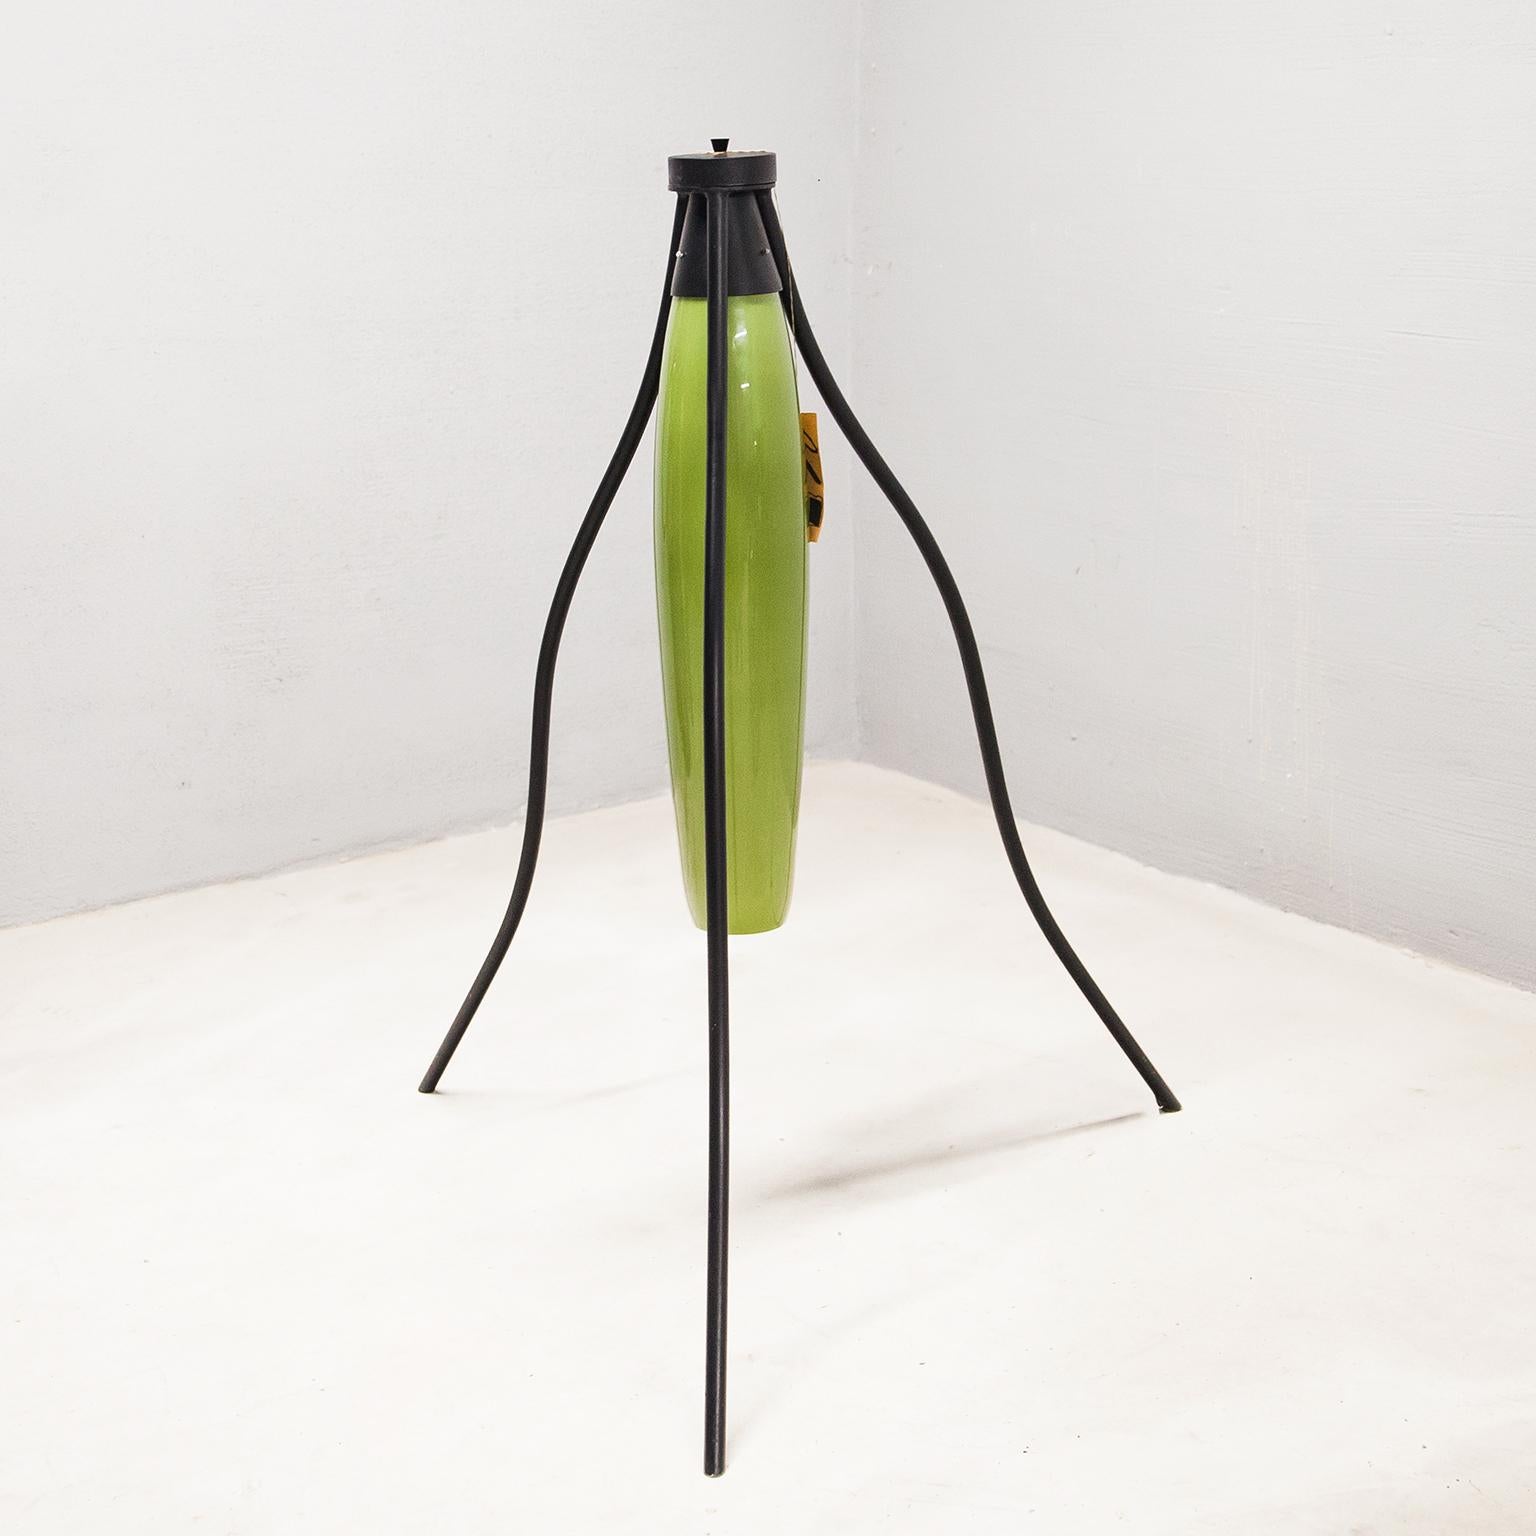 Prototype tripod table lamp with a green conical Murano glass shade designed by the Artist Maurizio Pellegrin.